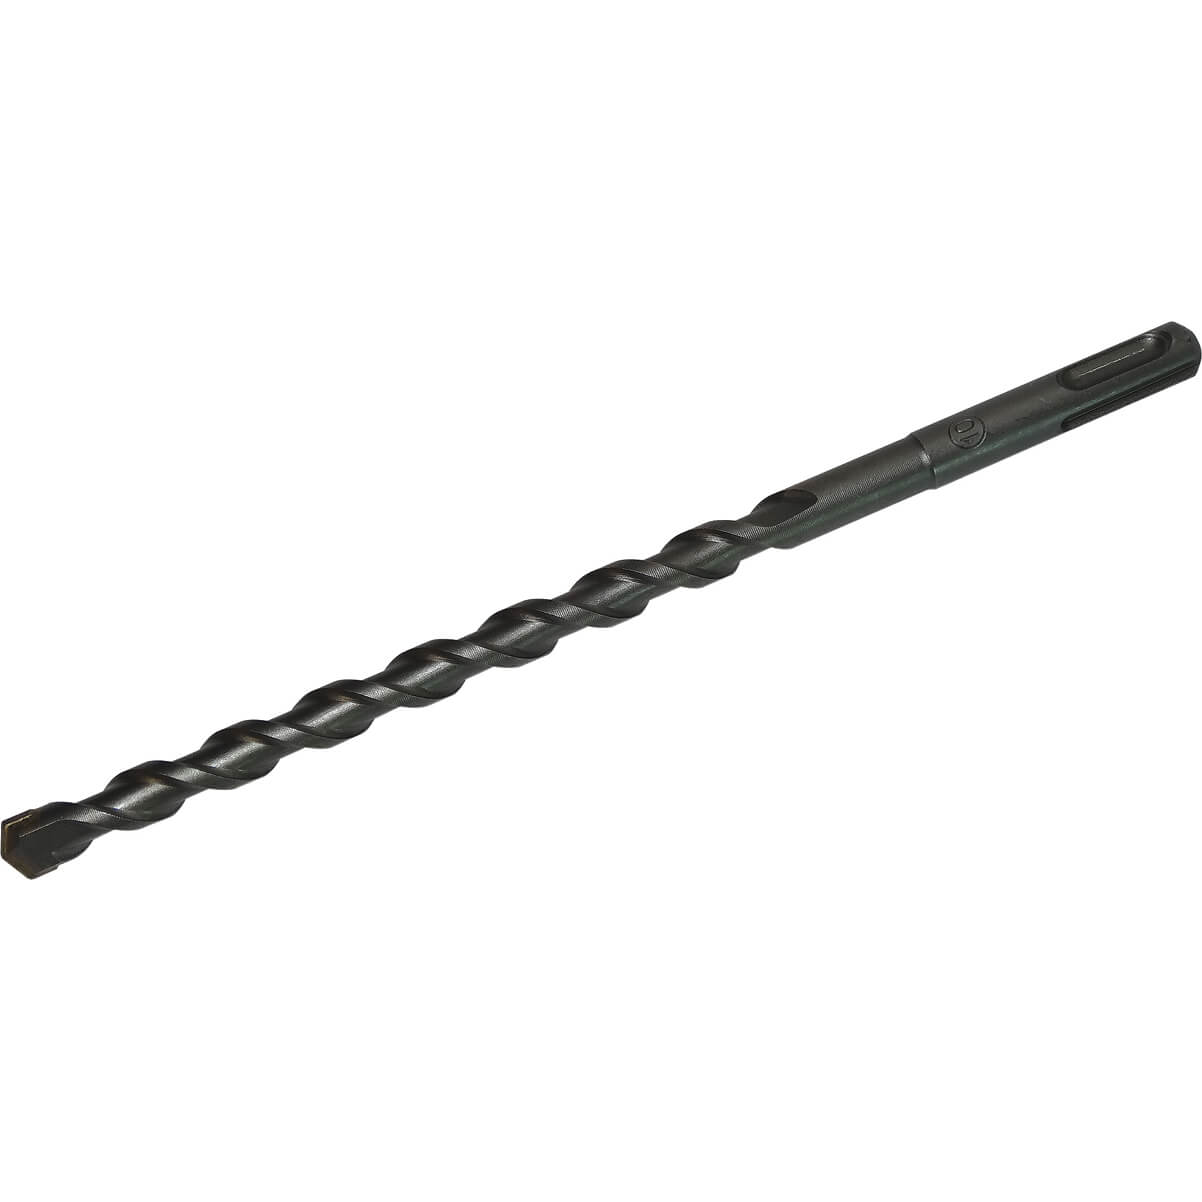 Image of CK SDS Plus Masonry Drill Bit 10mm 210mm Pack of 1